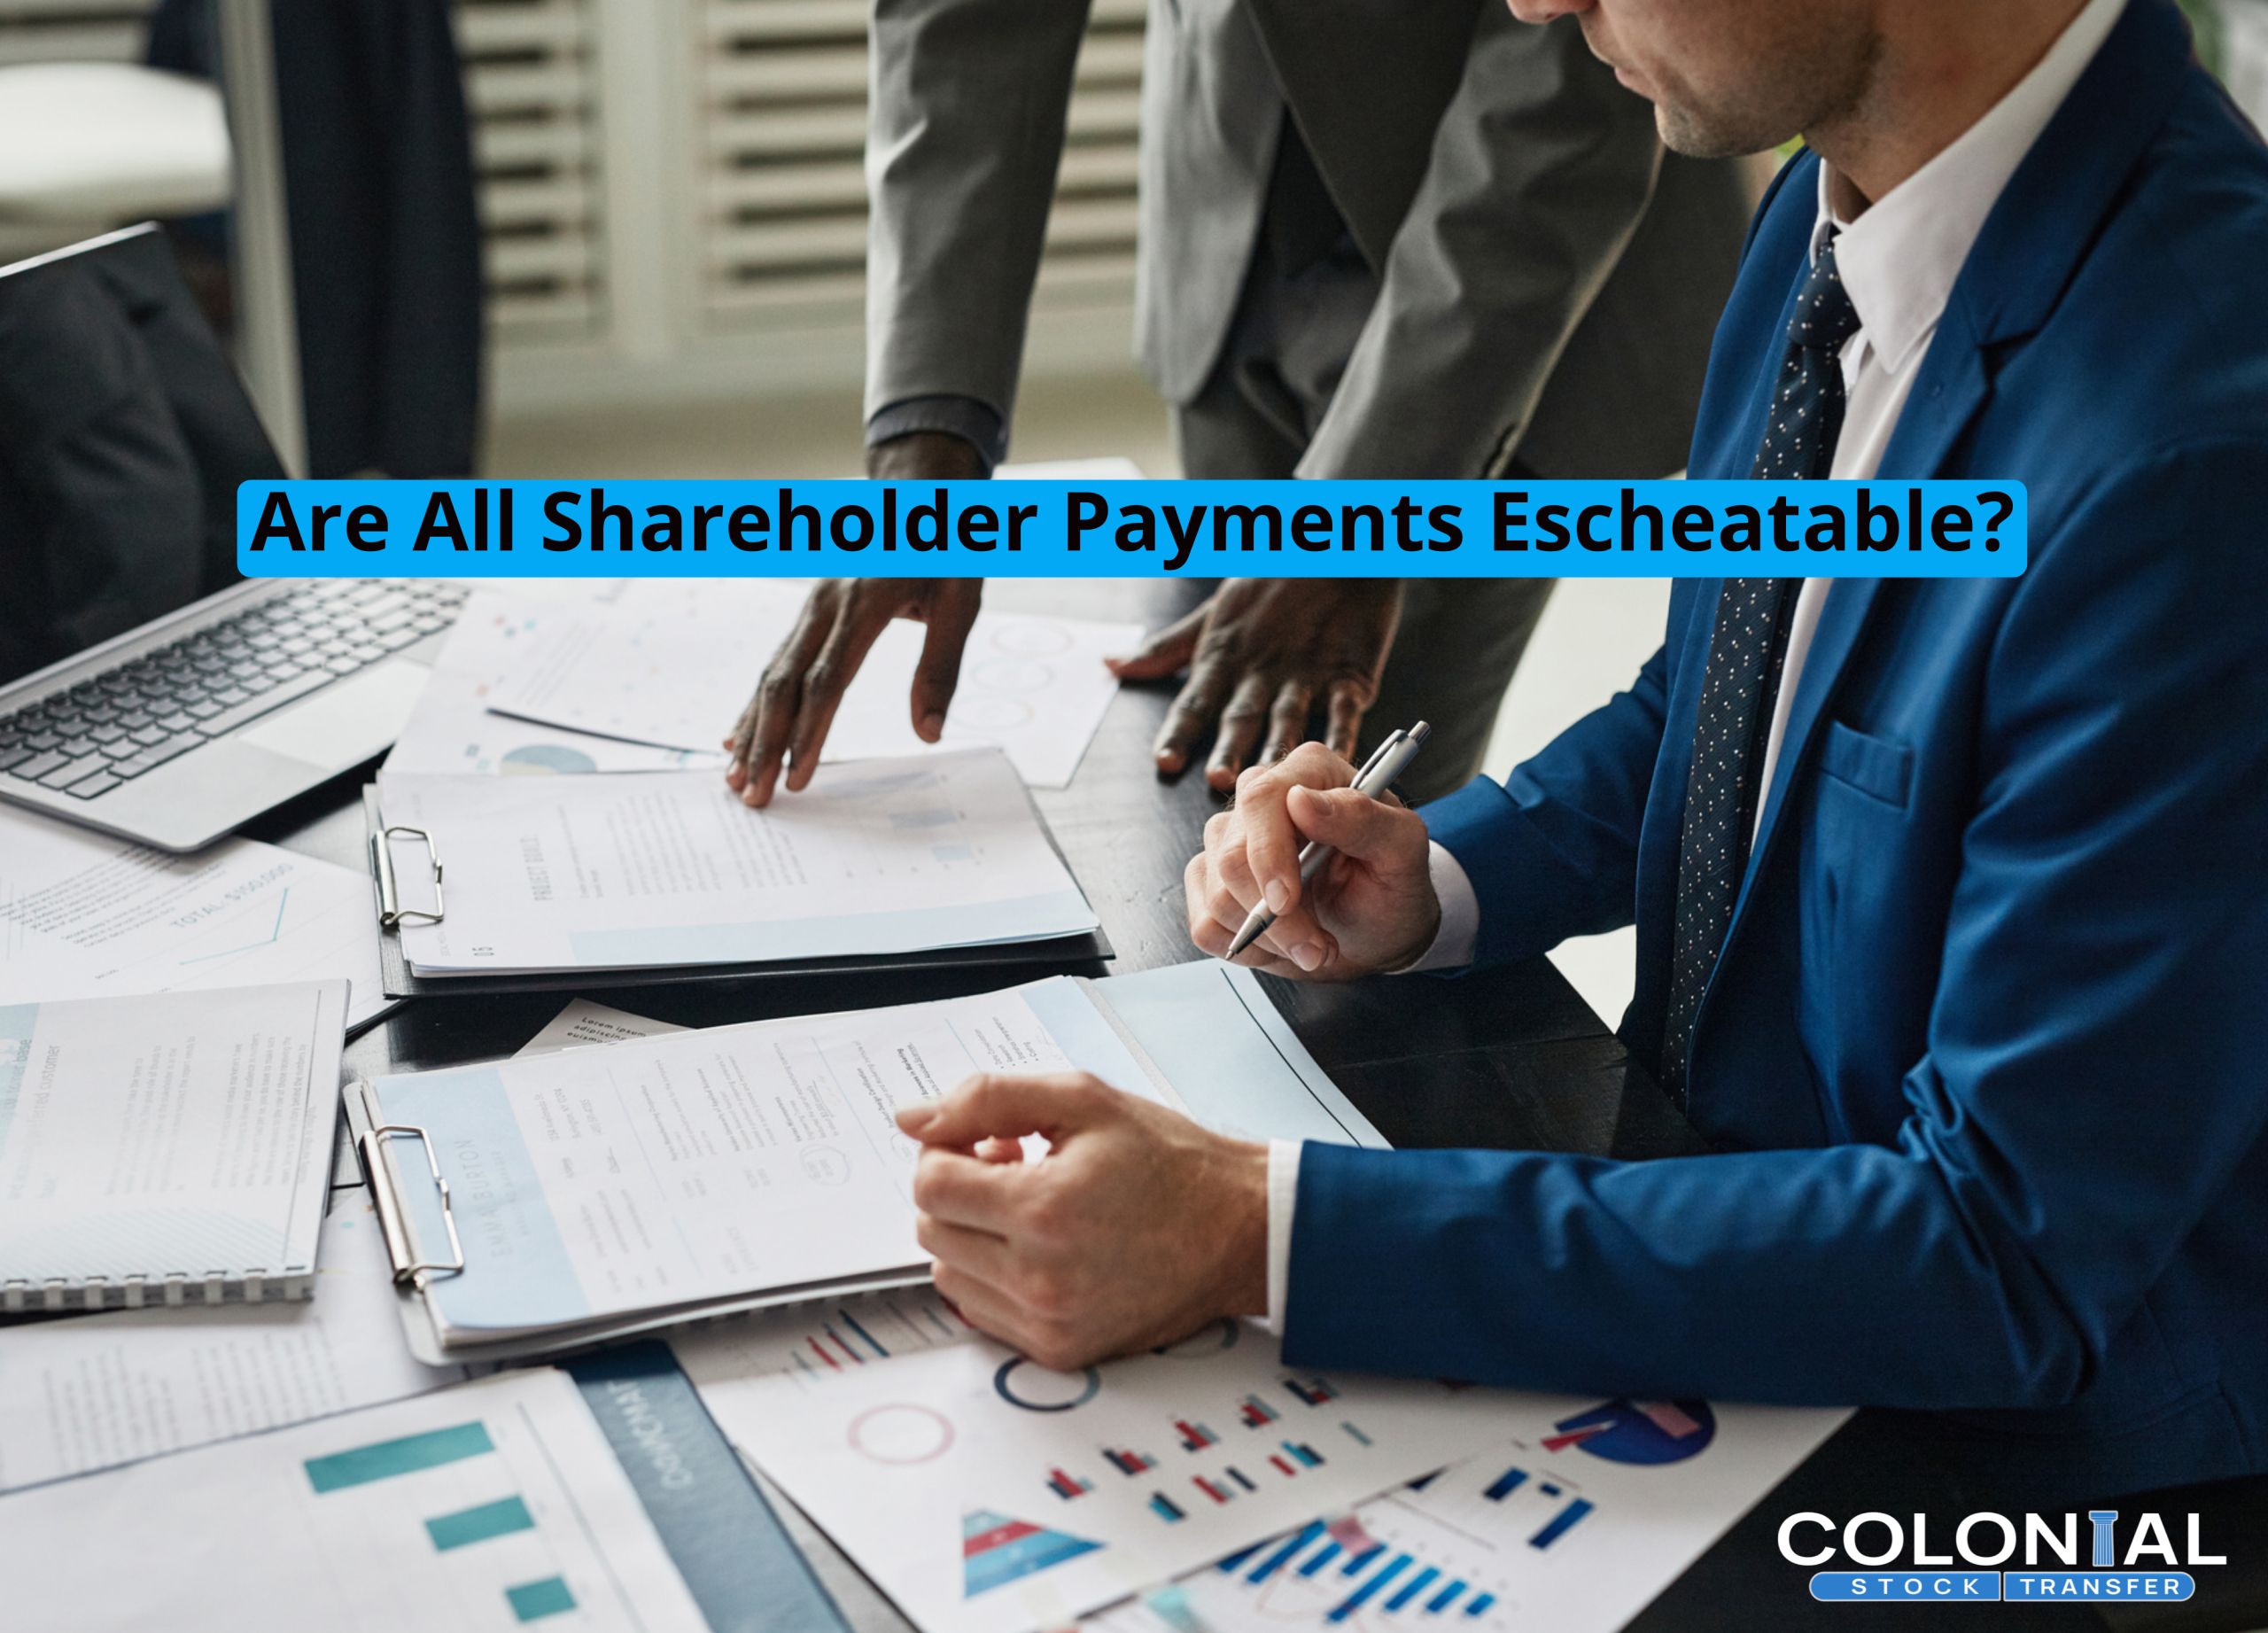 Are All Shareholder Payments Escheatable?